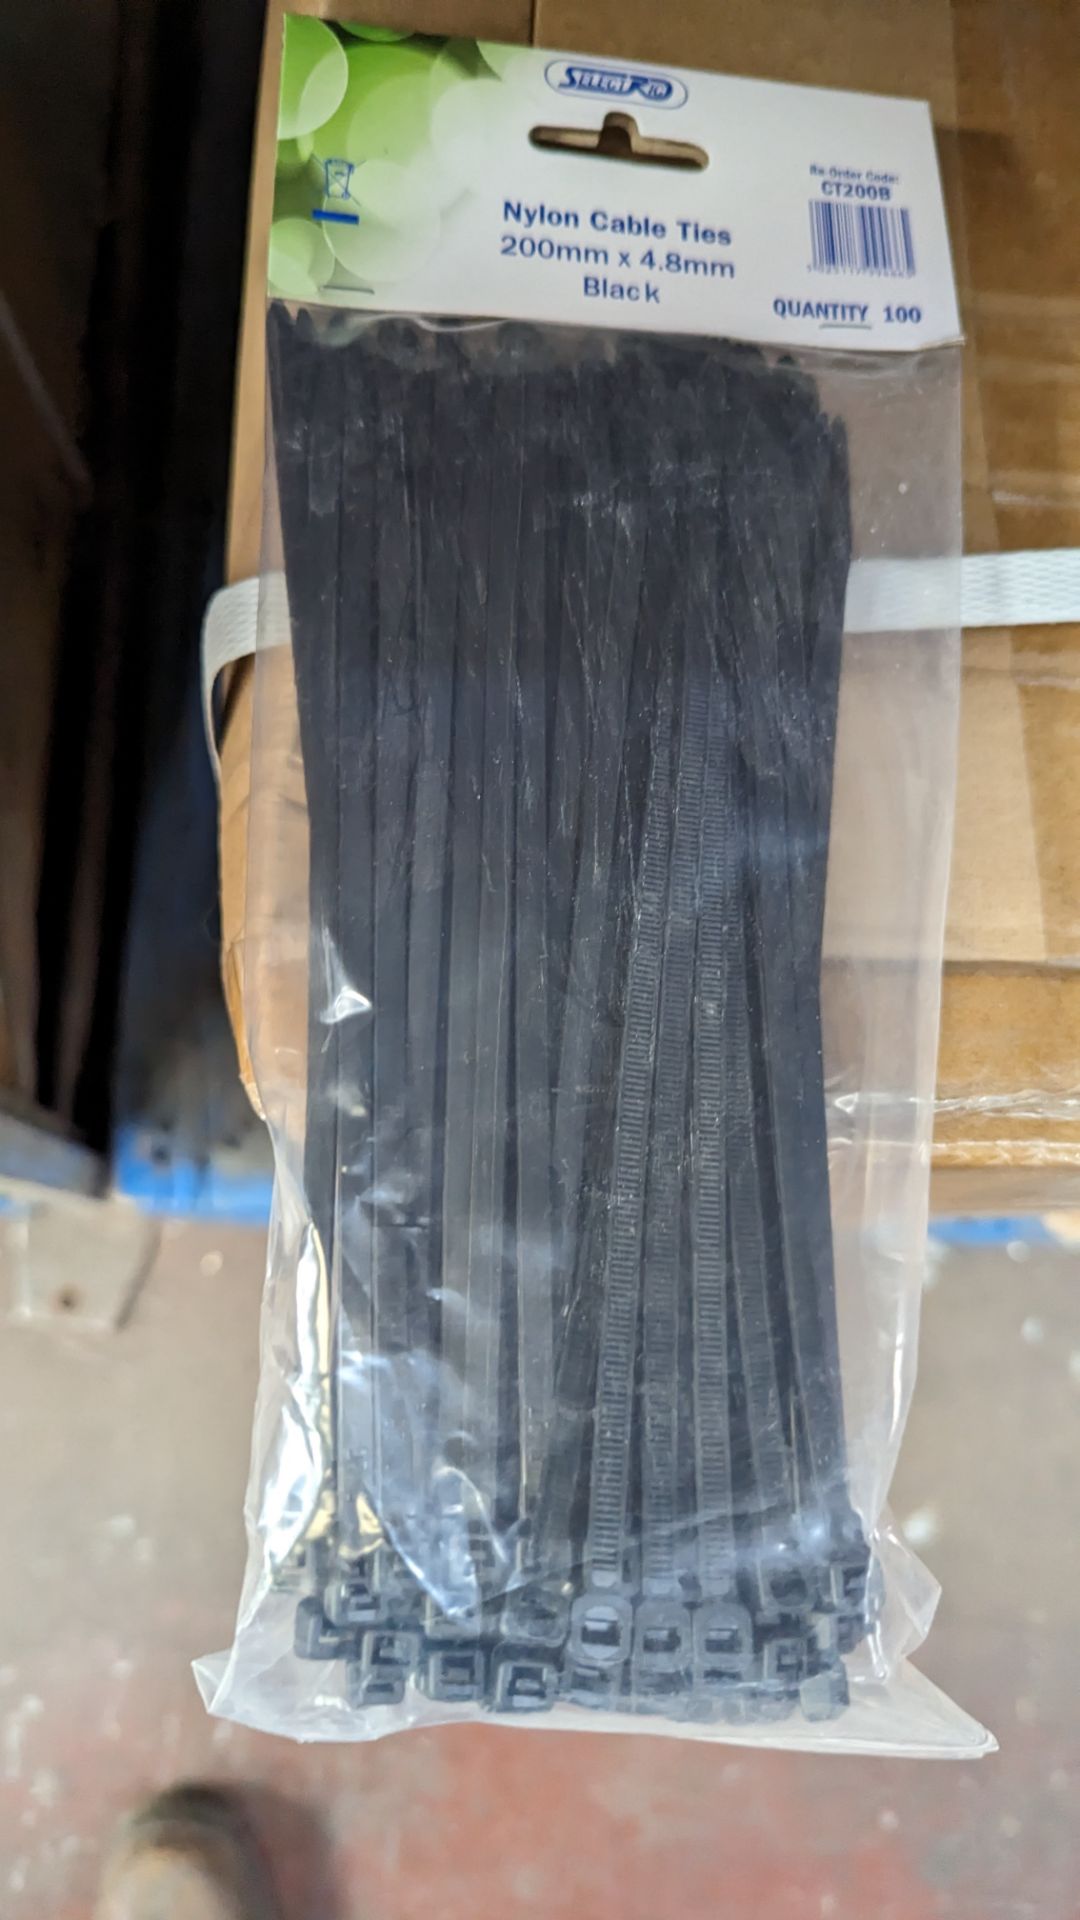 Carton of 200mm x 4.8mm black cable ties - 100 ties per pack. 15,000 ties in the box/lot - Image 3 of 4